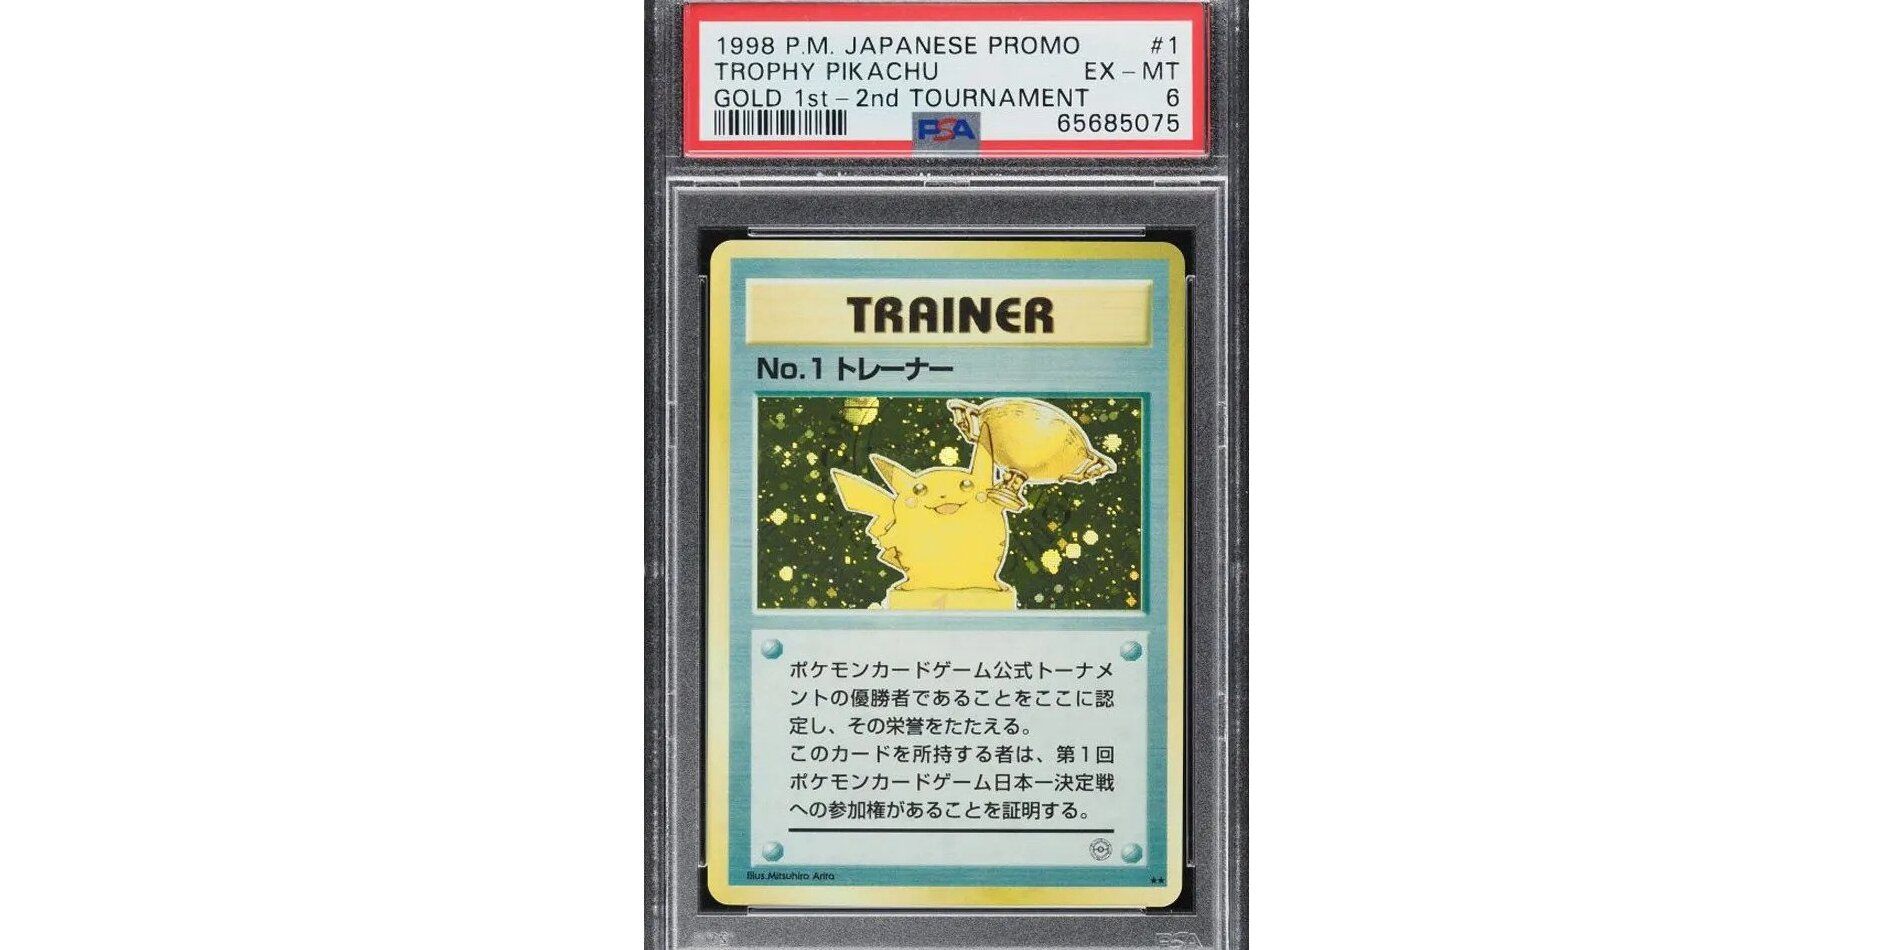 A PSA 6 version of the Gold Trophy Pikachu card